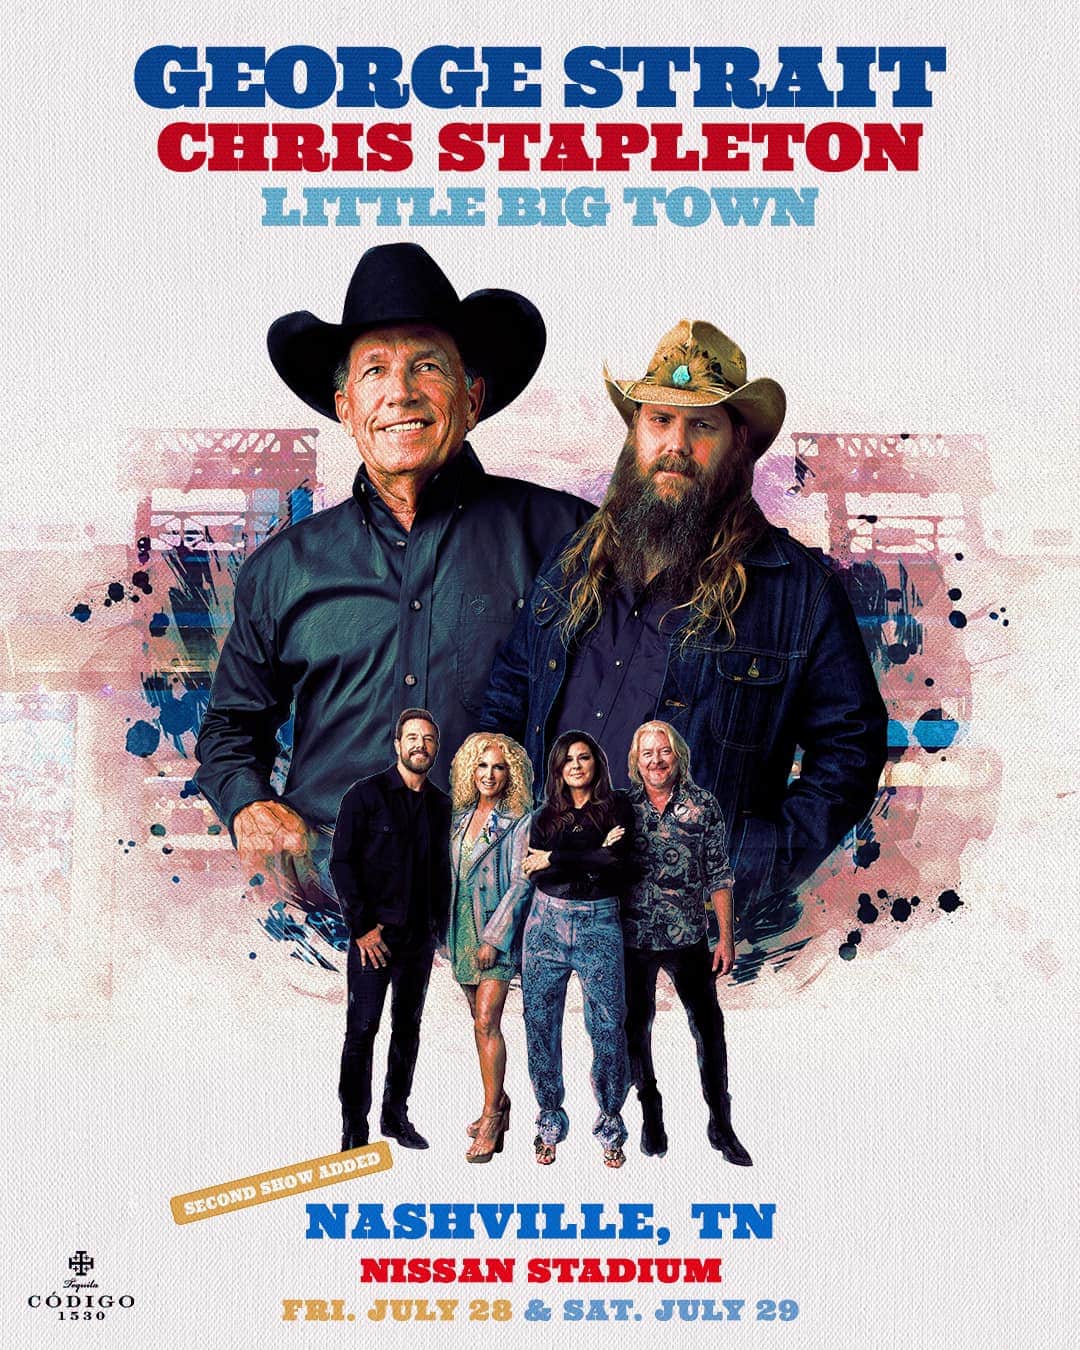 Chris Stapleton sings George Strait's music on his own, but also while performing a series of stadium shows with him across the U.S. with Little Big Town